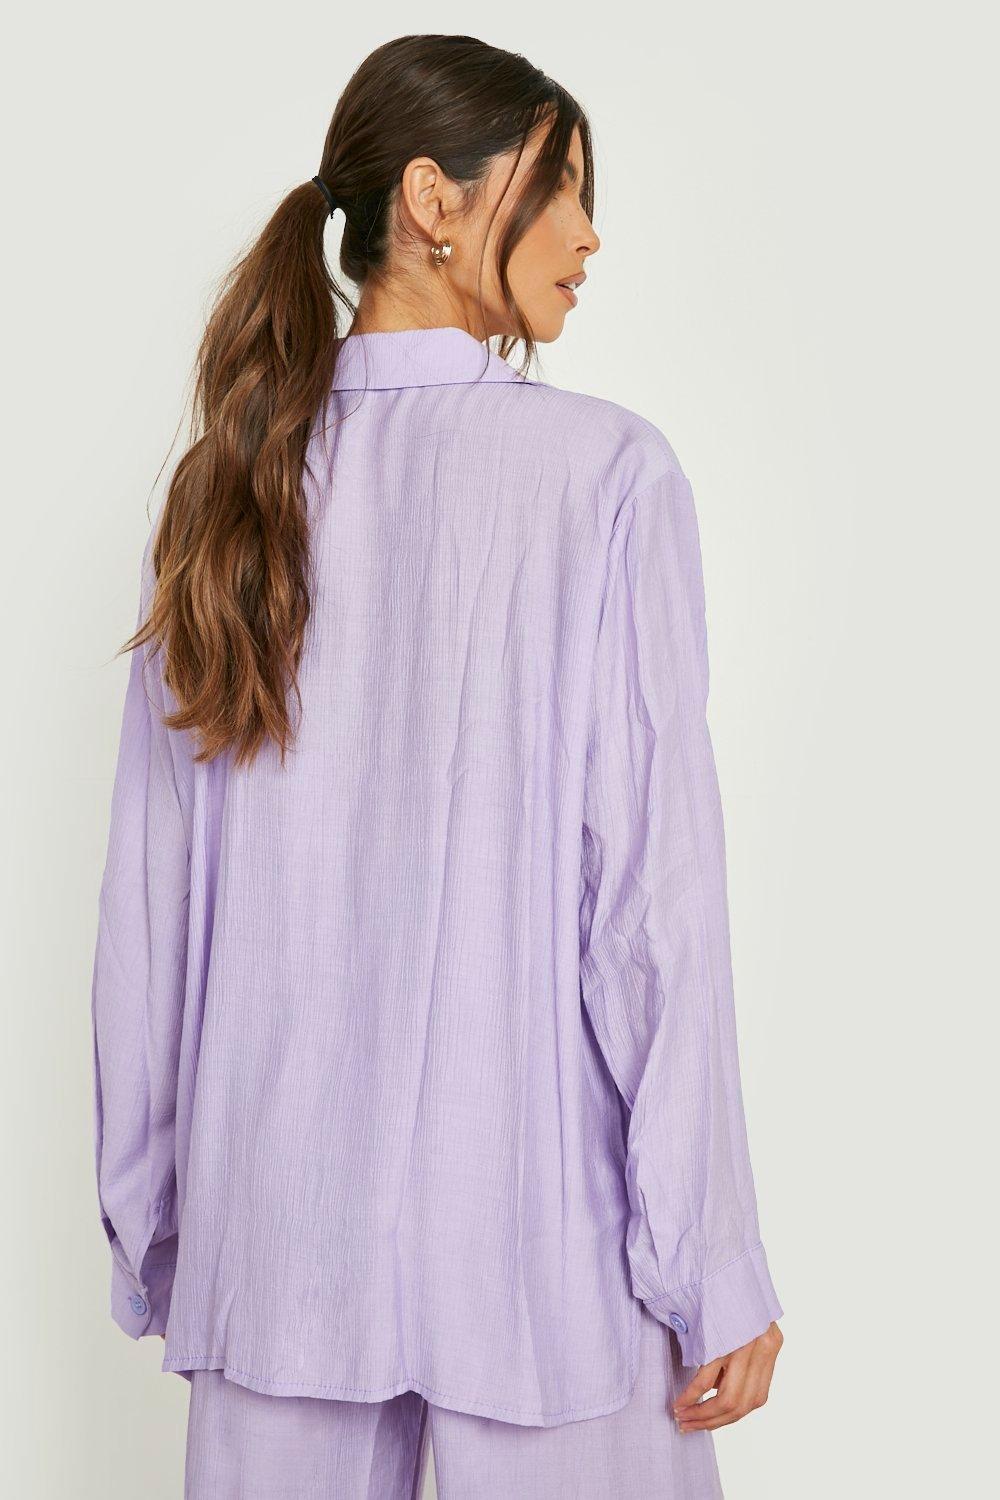 Women's Lilac Crinkle Relaxed Fit Linen Look Shirt